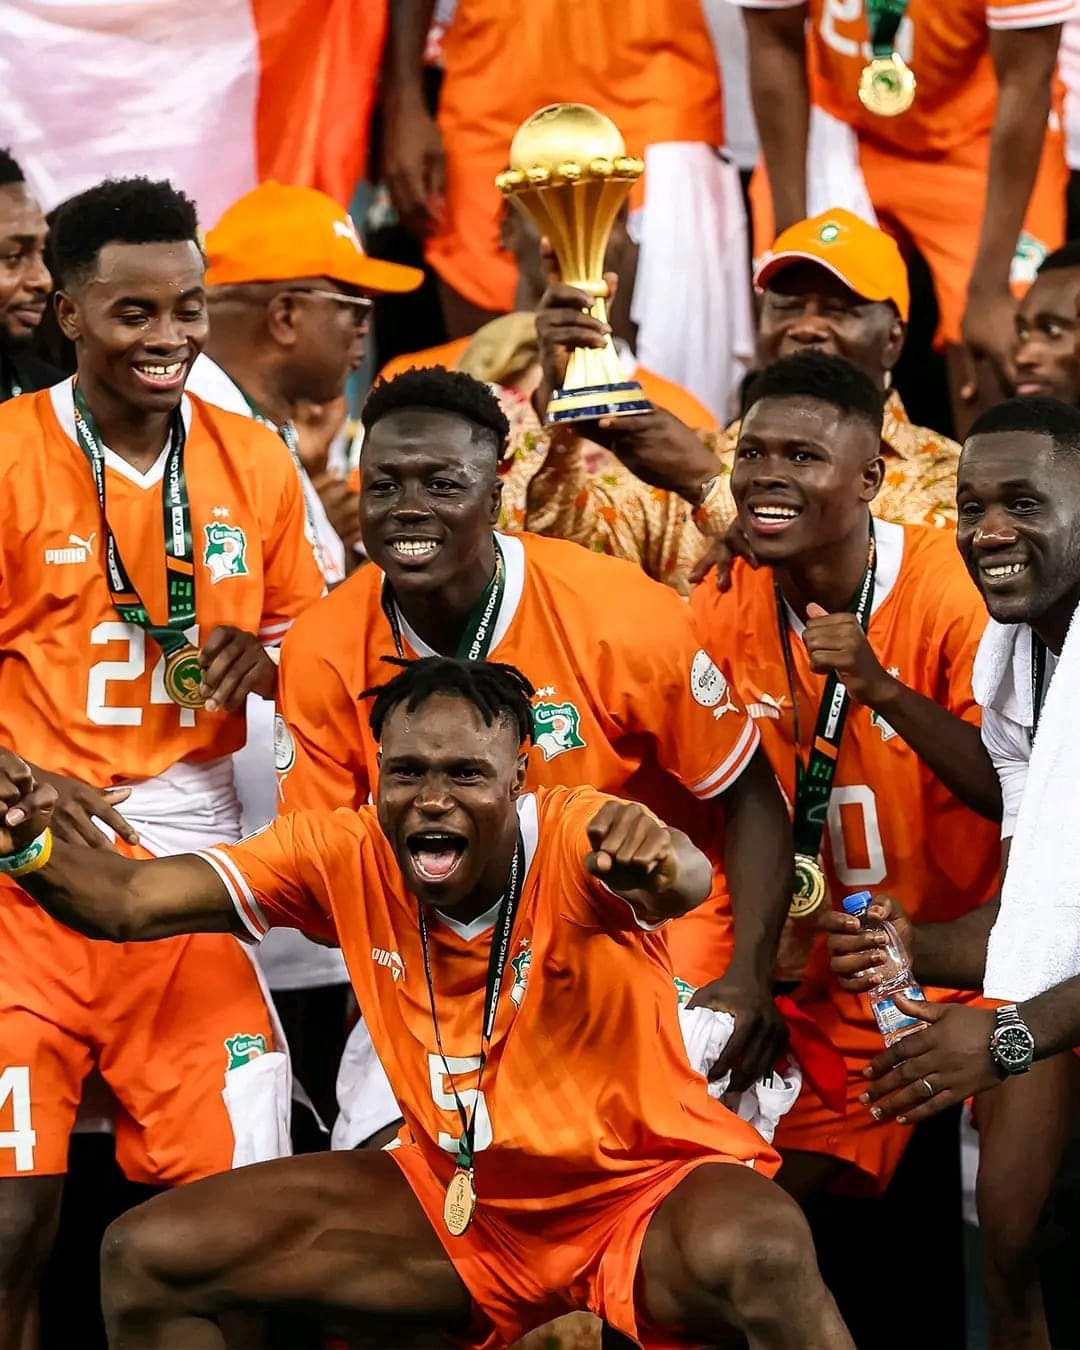 #AFCON23: Elephants Trump Super Eagles As Ivory Coast Emerges AFCON Champions in Thrilling Comeback Victory